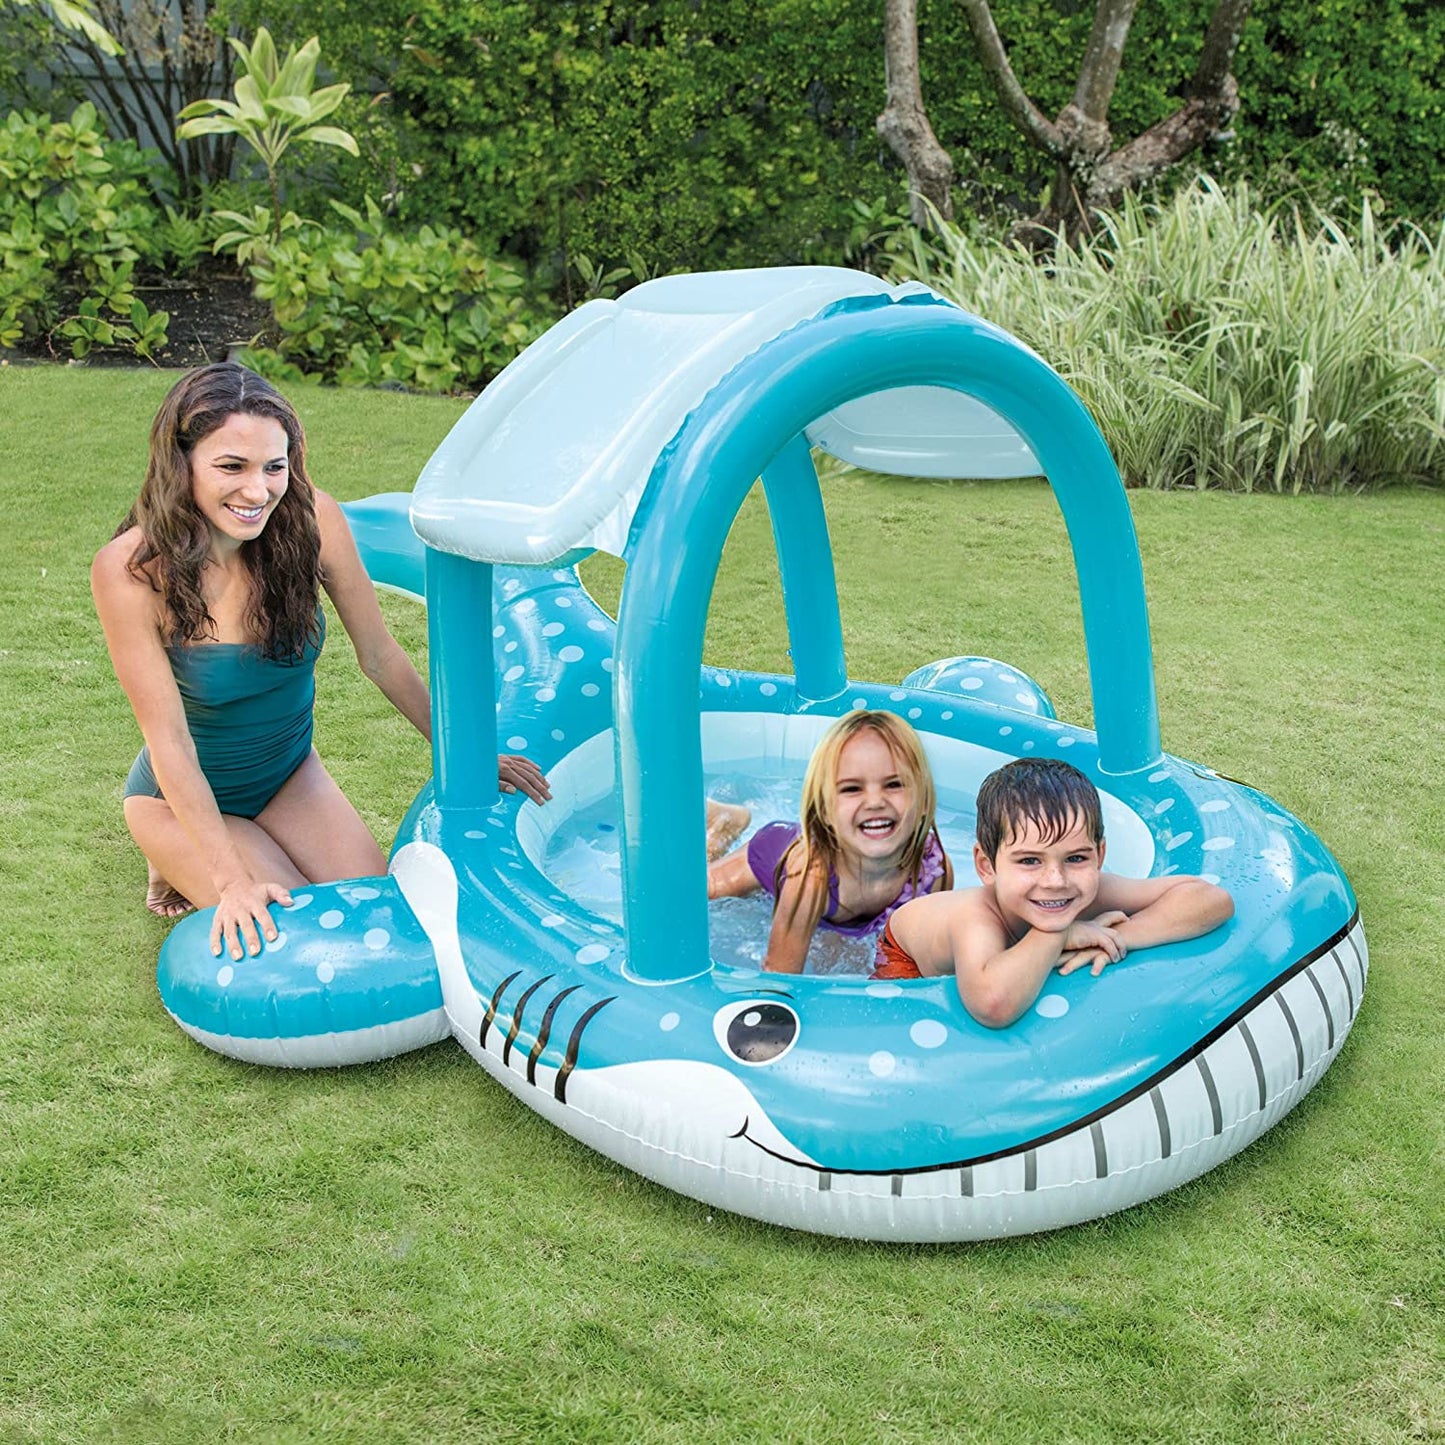 Intex Whale Shape Inflatable Kids Bath Tub Pool 57440 - Lightweight with Built-in Sunshade (Best for 2-6 years), Dimensions: 2.11 x 1.85 x 1.09 Meters, Includes Free Repair Patch